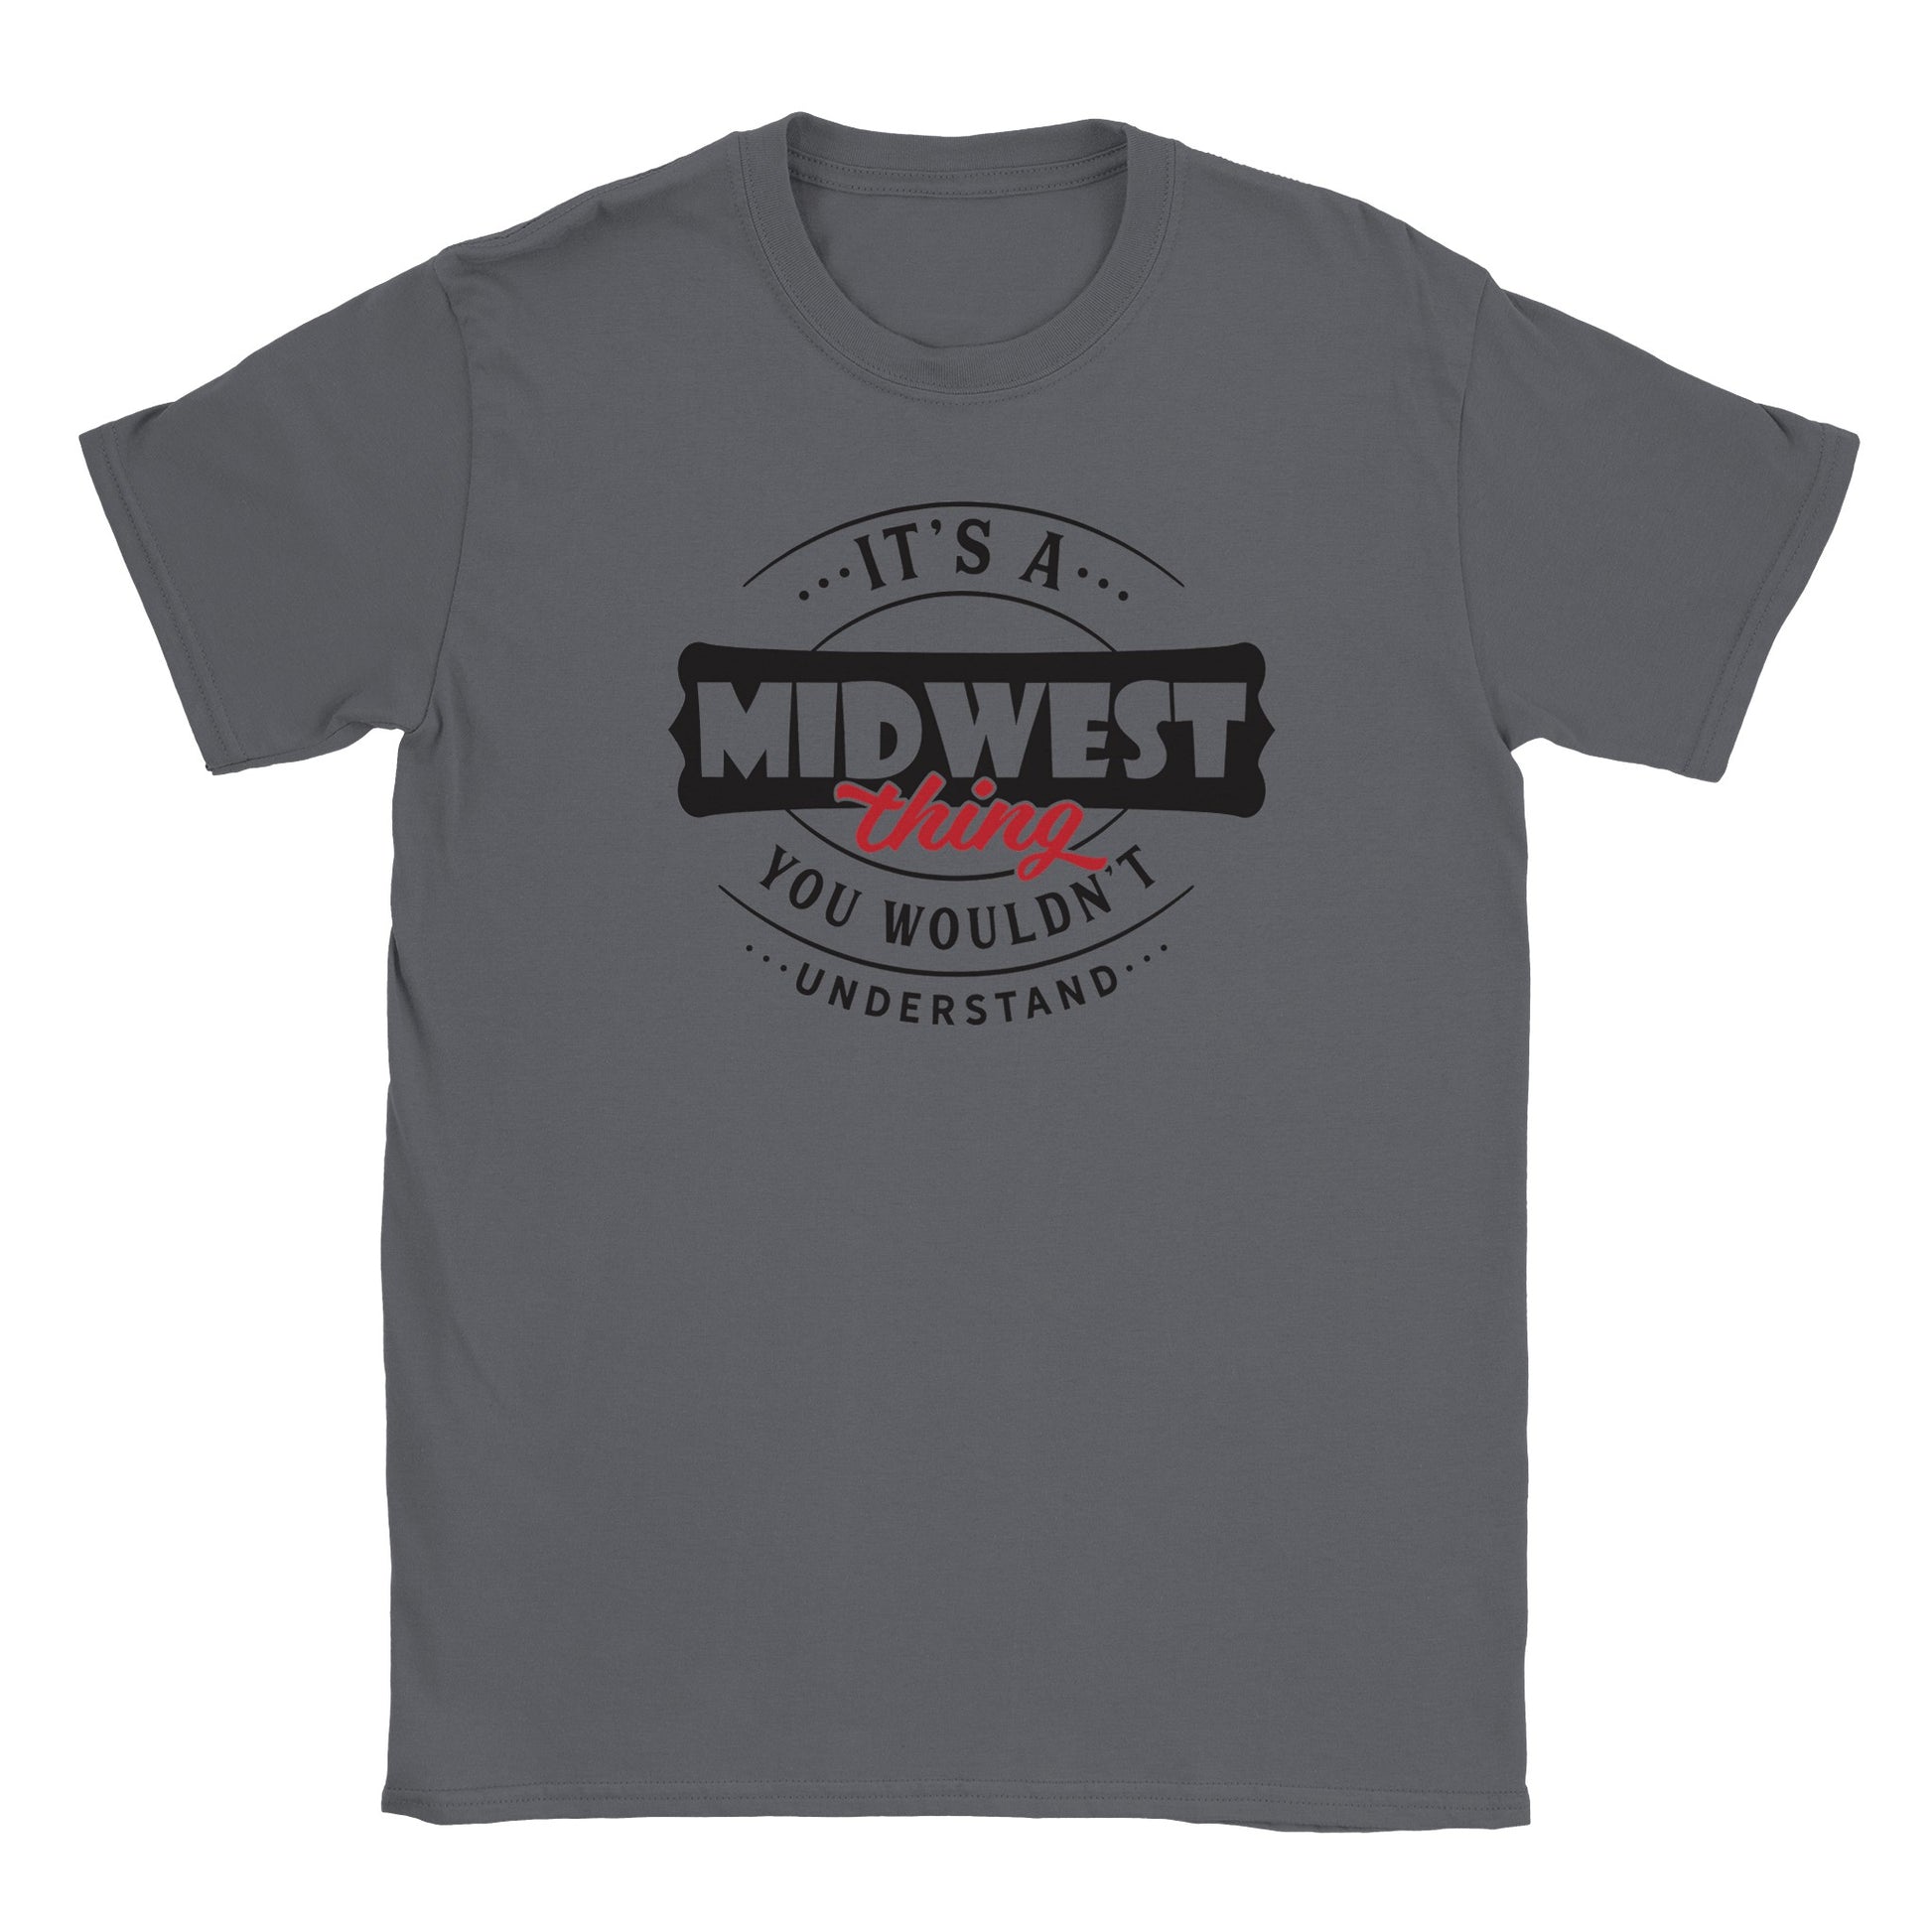 It's a Midwest Thing T-shirt - Mister Snarky's